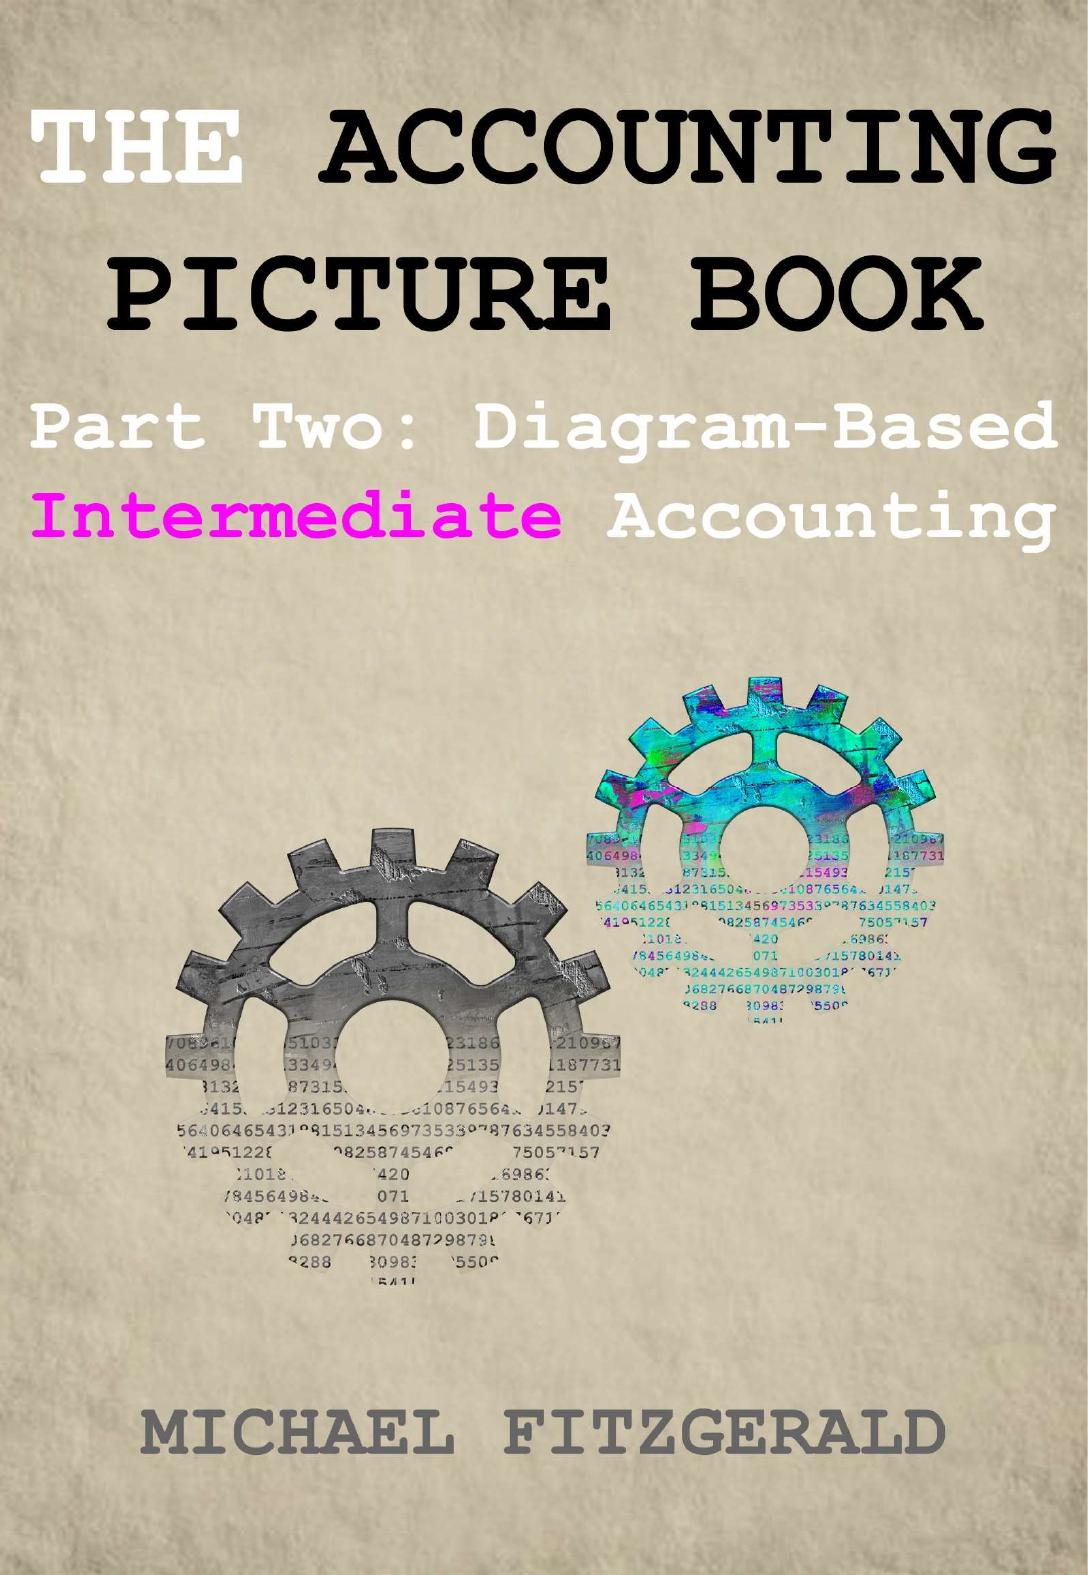 The Accounting Picture Book: Part Two: Diagram-Based Intermediate Accounting